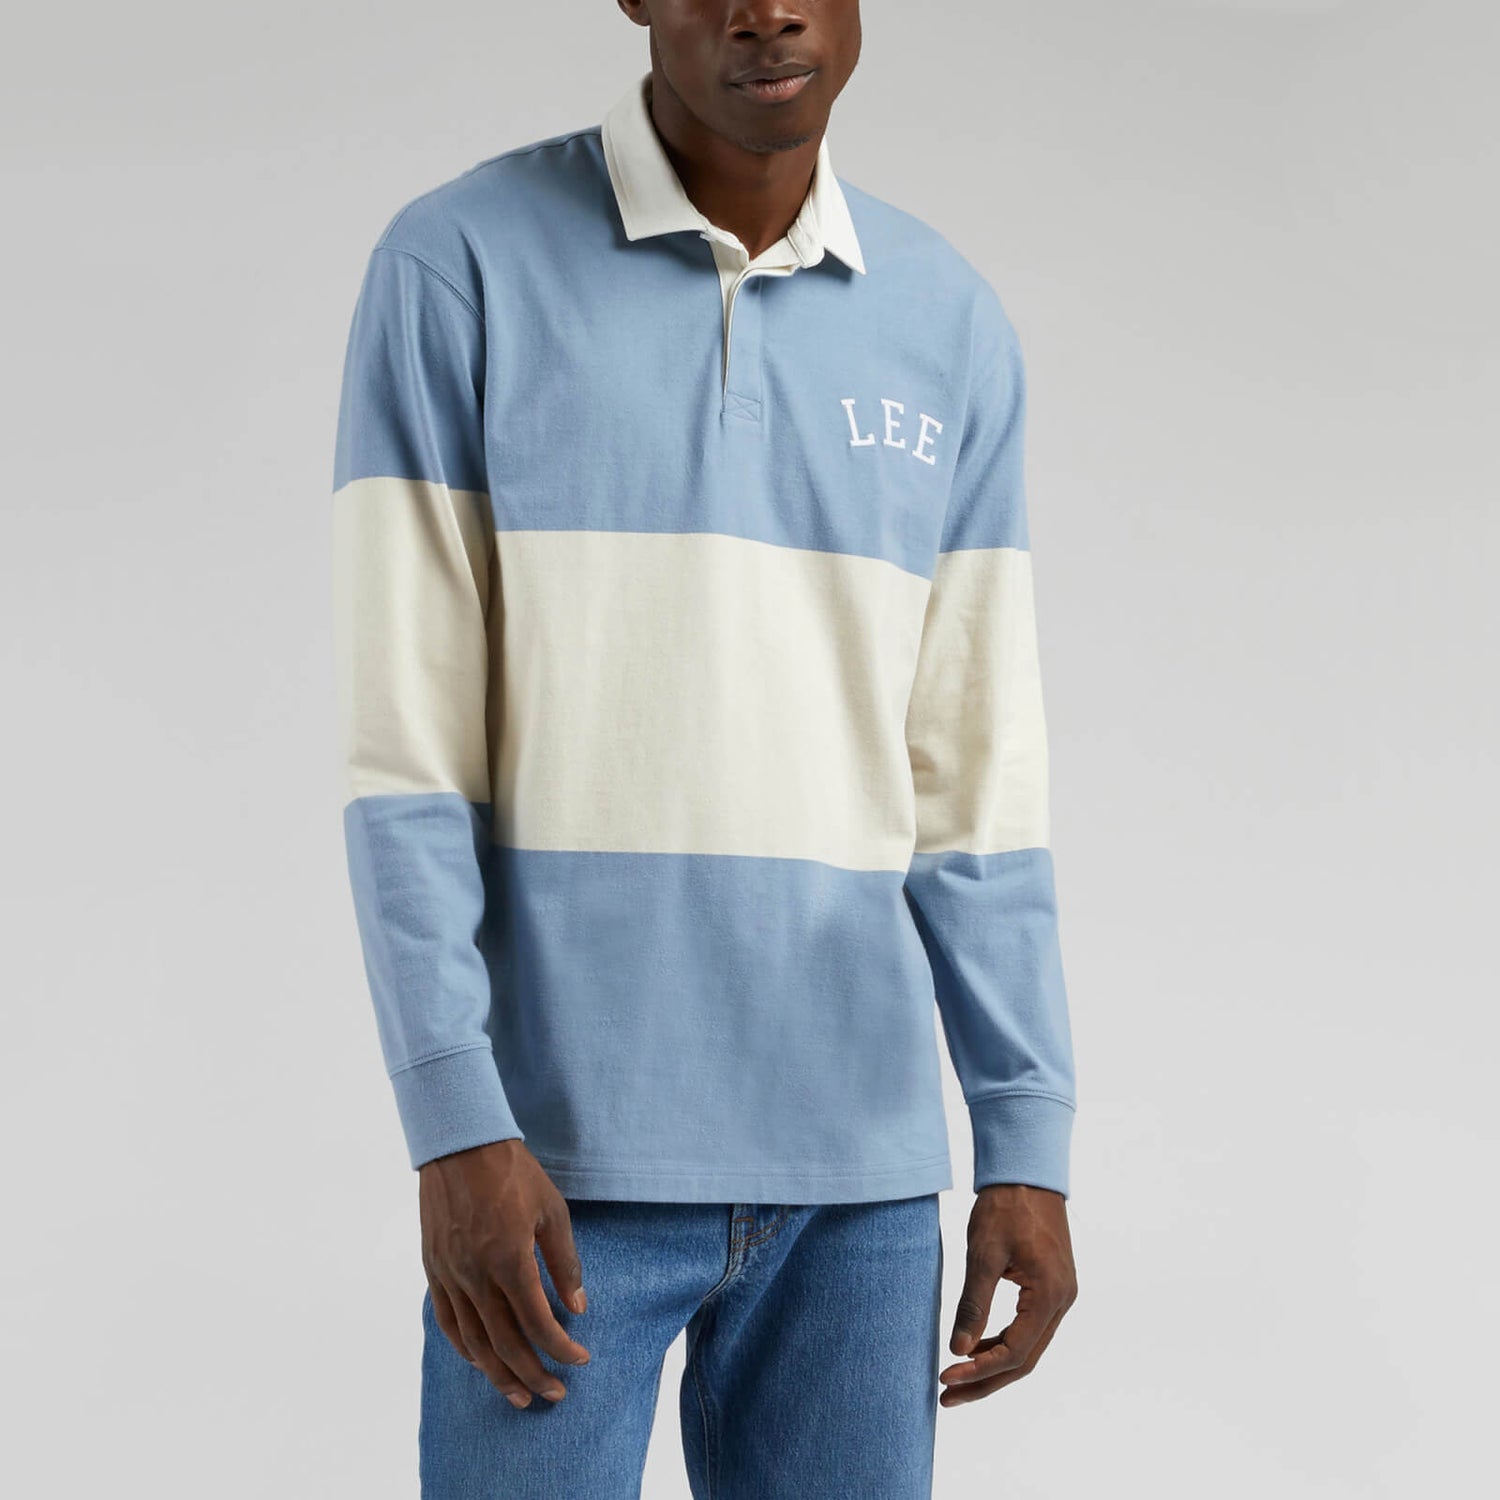 Lee Striped Cotton Rugby Top - S